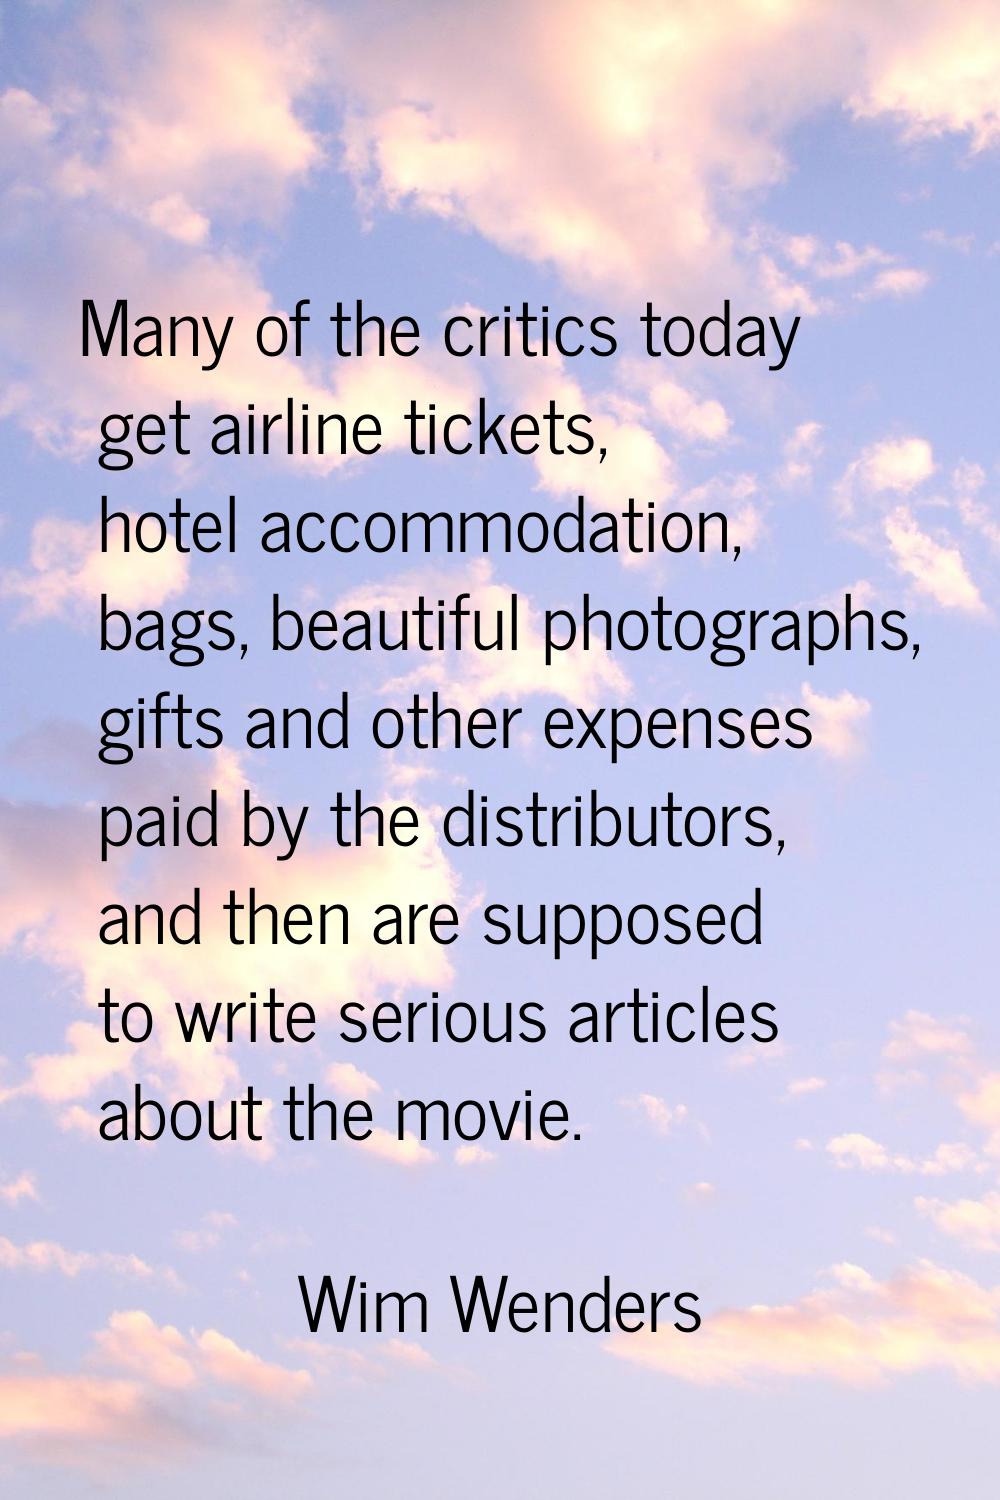 Many of the critics today get airline tickets, hotel accommodation, bags, beautiful photographs, gi